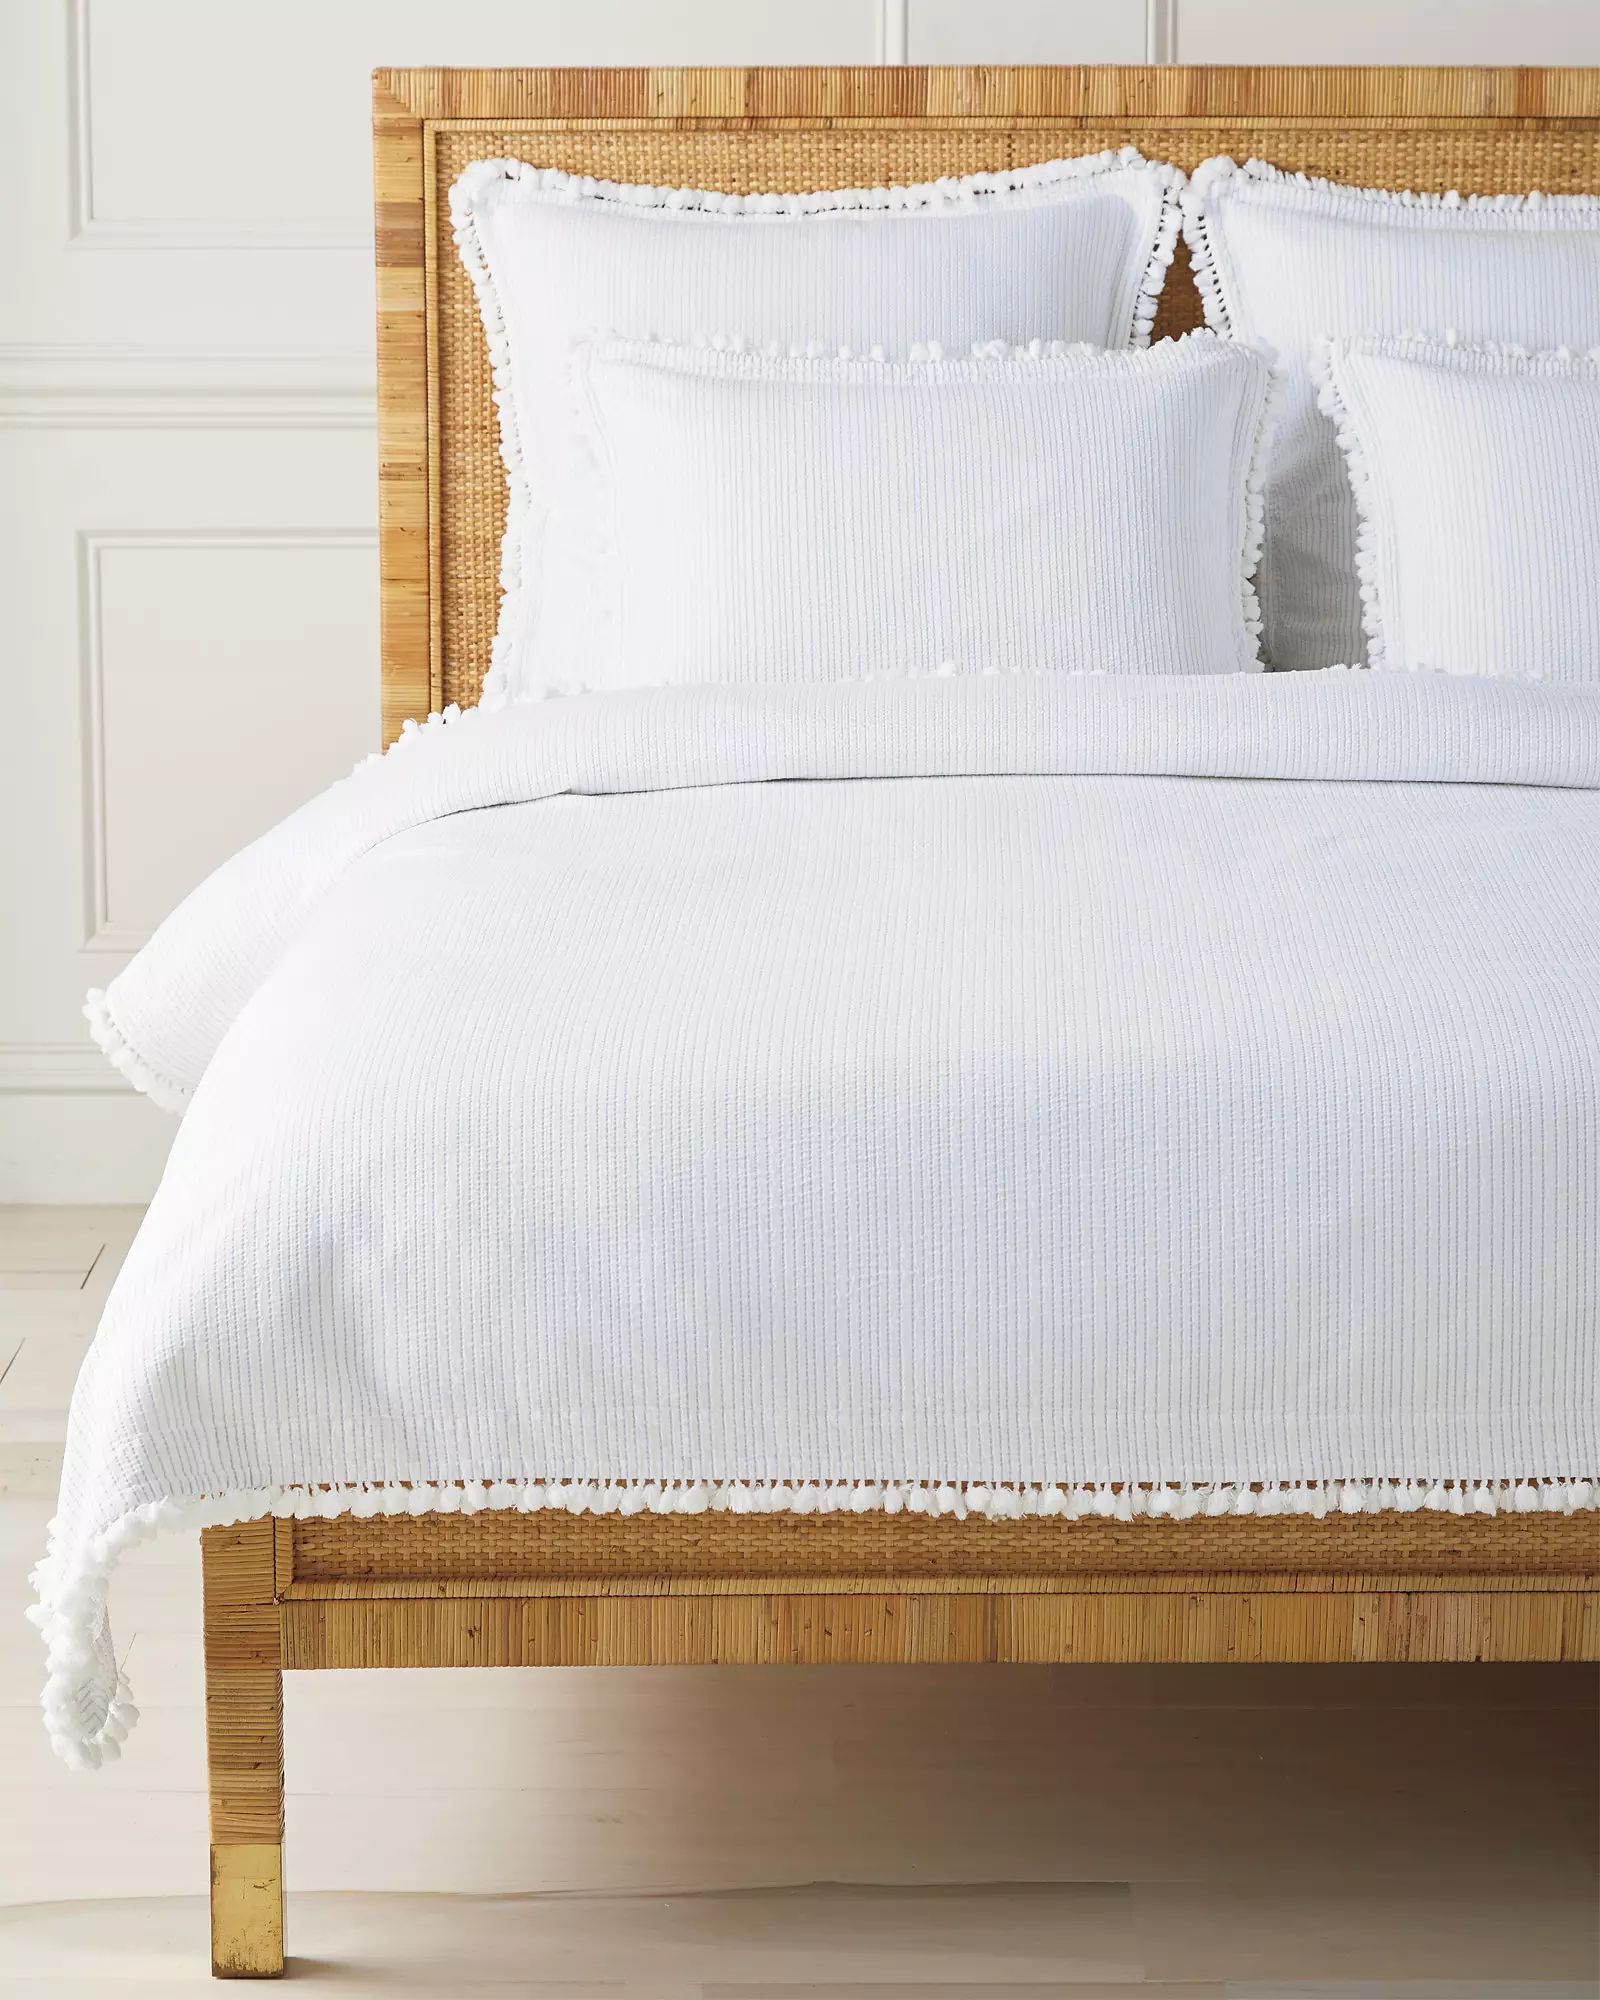 Hastings Coverlet | Serena and Lily